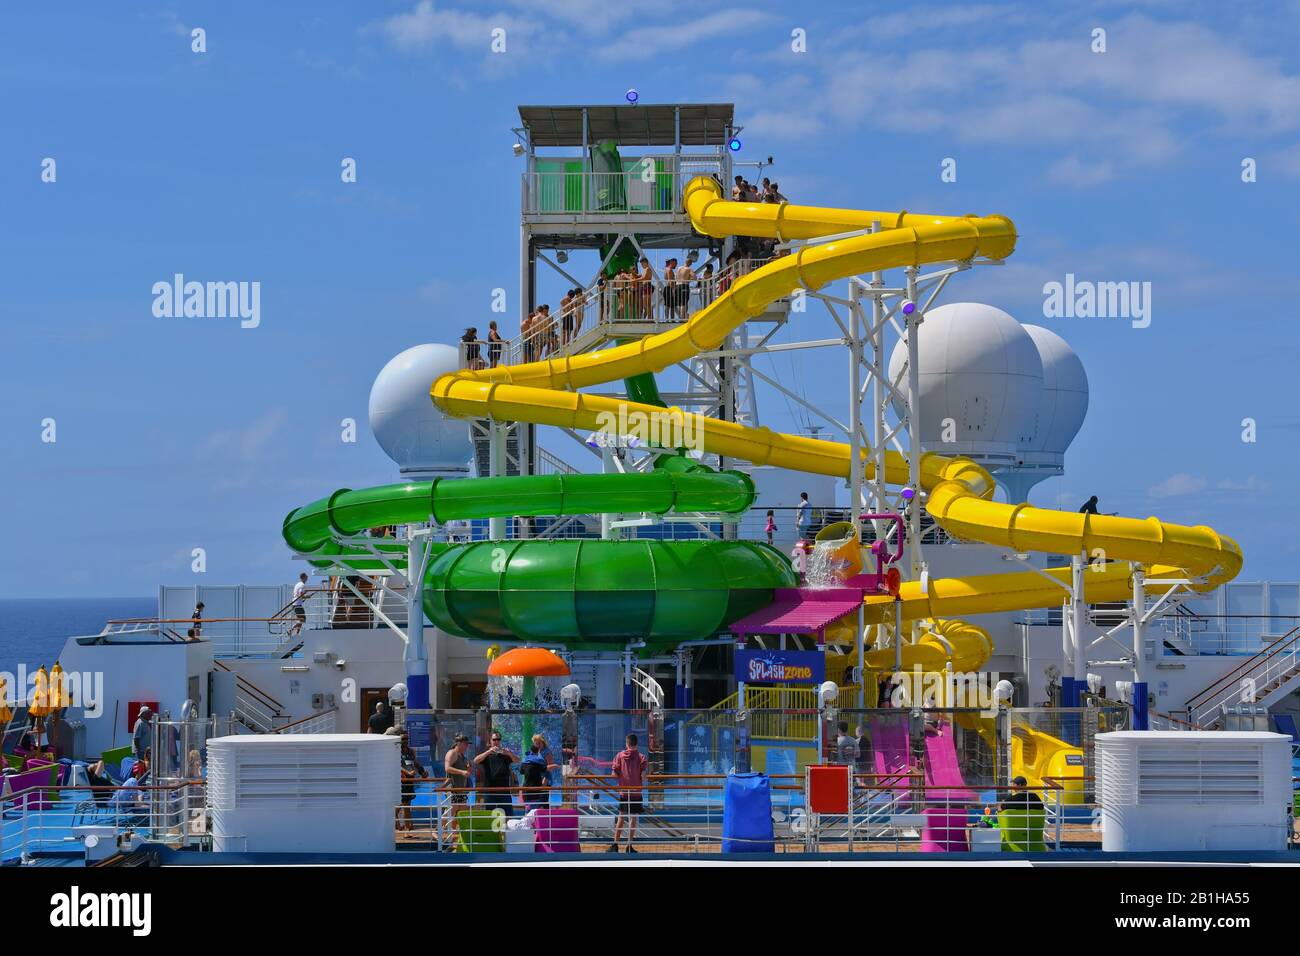 Carnival Splendor, South Pacific Ocean - February 13, 2020: Water slides and splash zone on cruise ship. Stock Photo